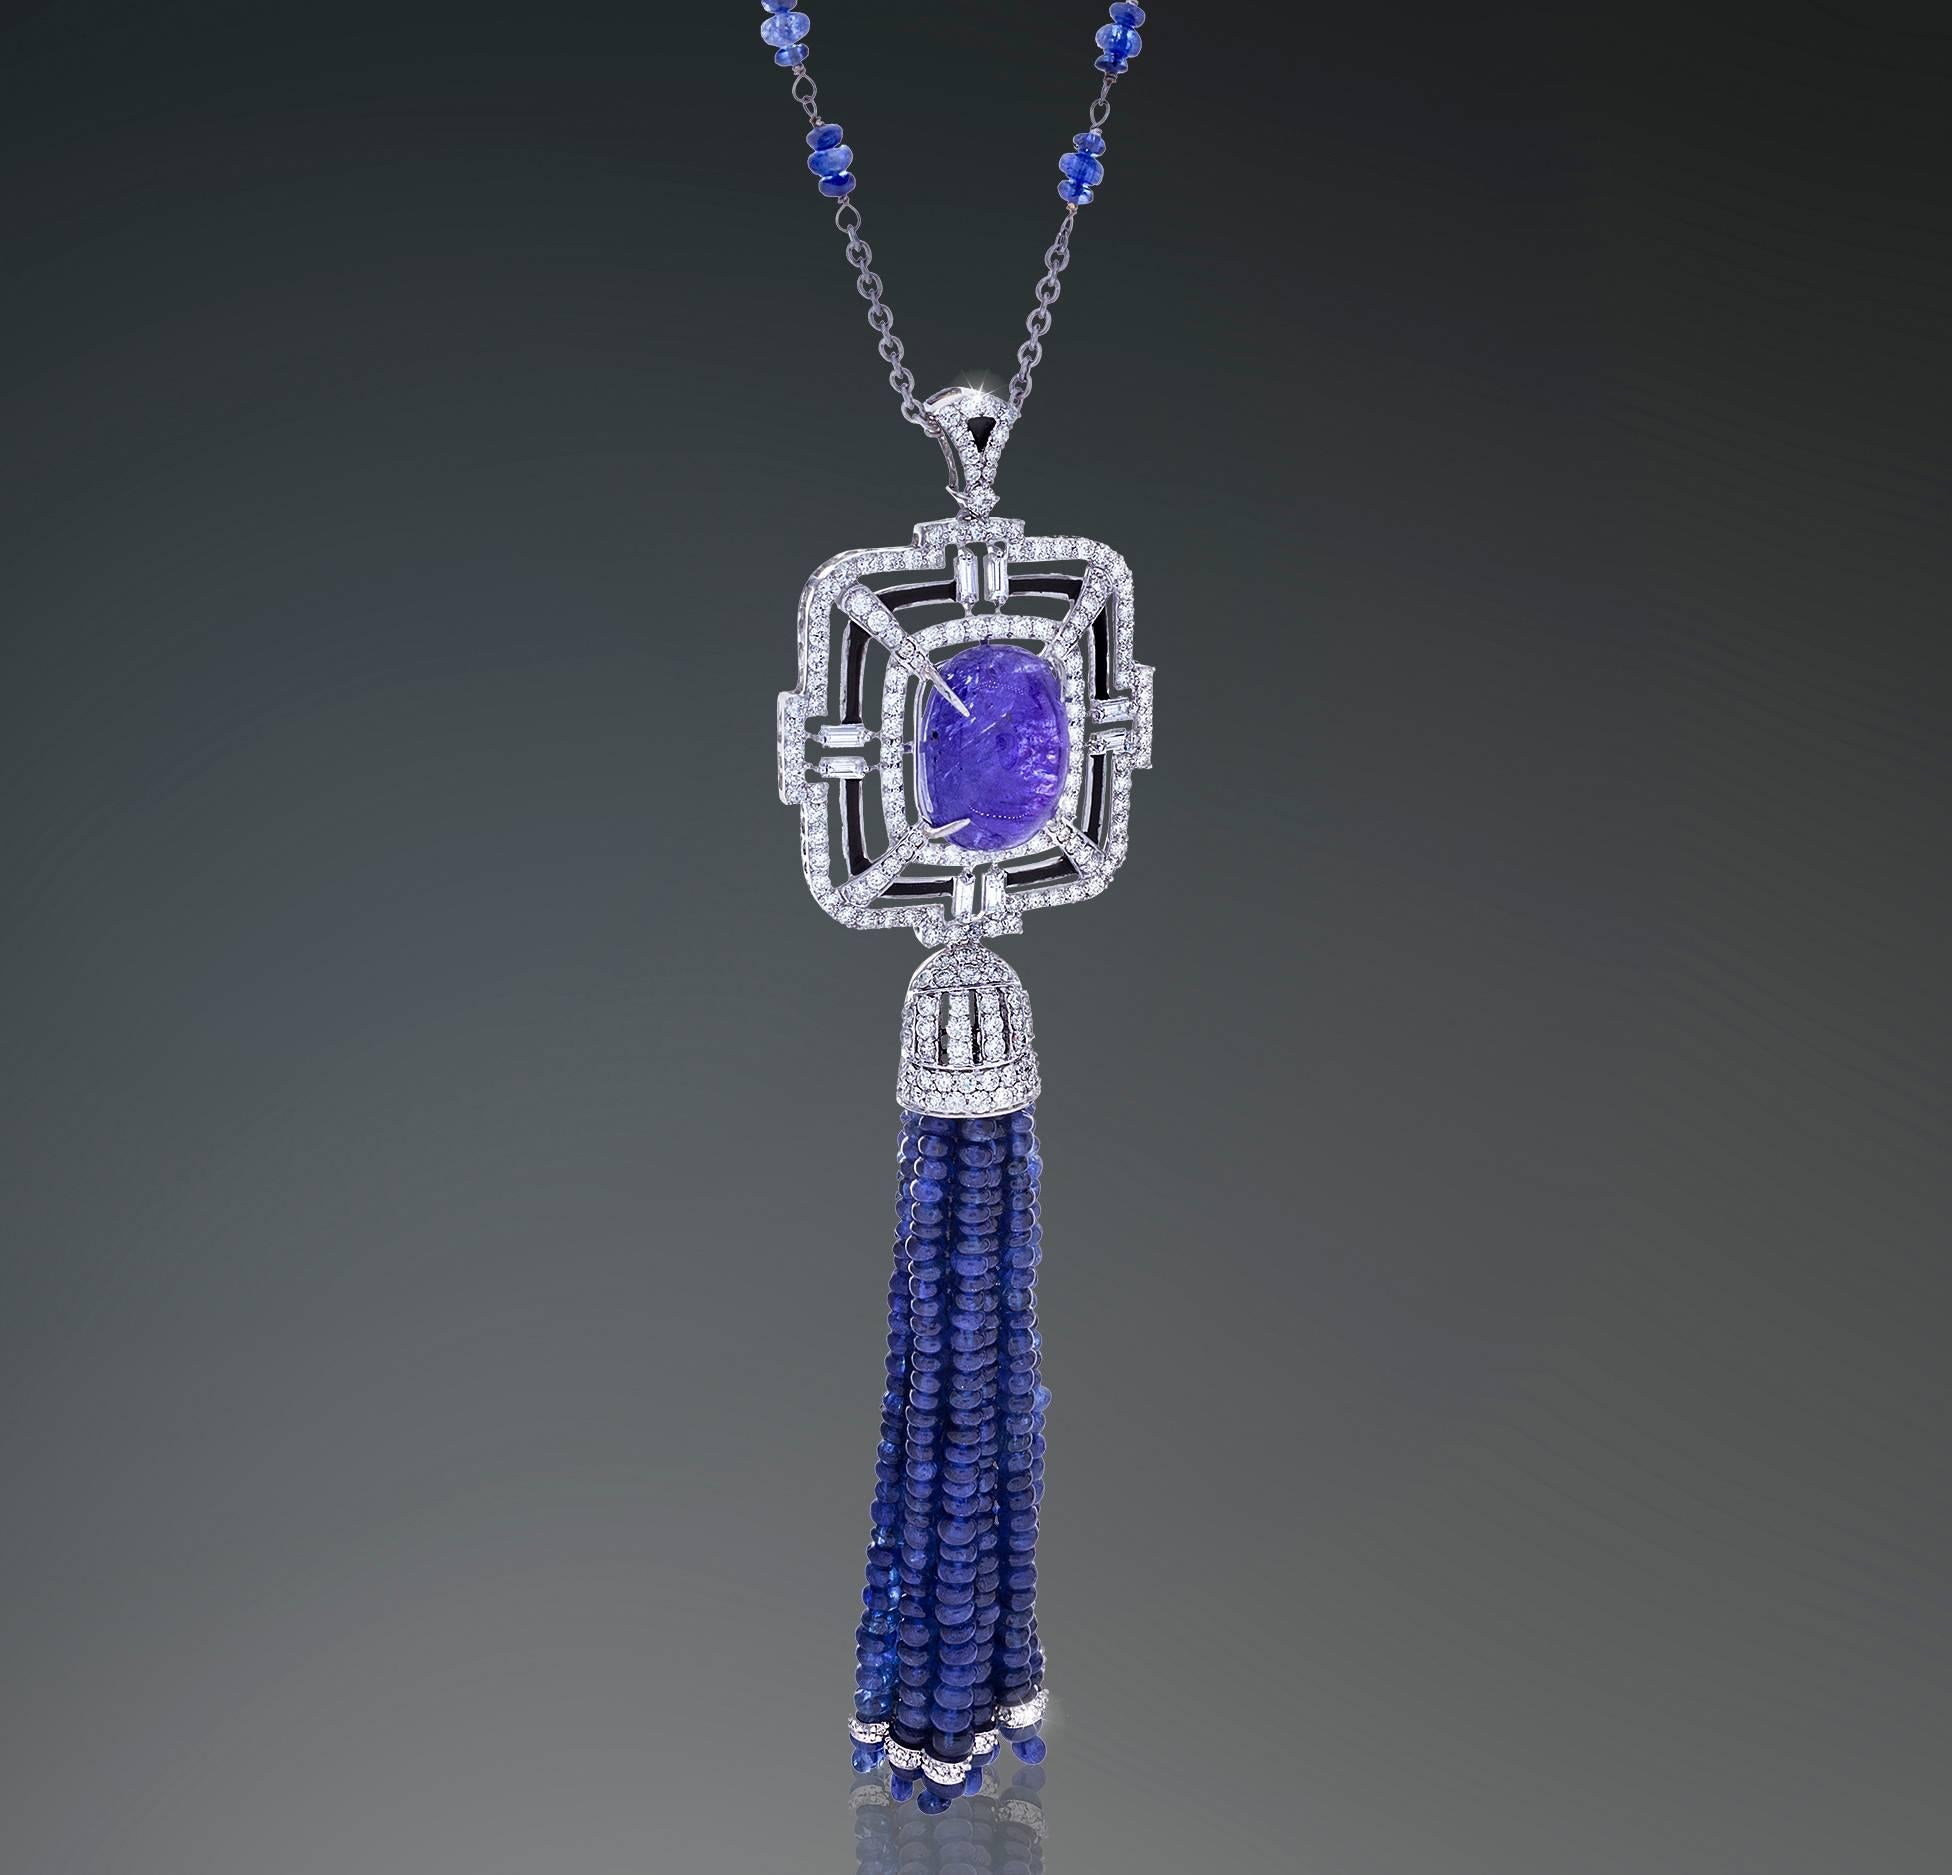 18K Tassle Necklace with one Tanzanites weighing 10.30 carats, faceted Sapphire beads weighing  70.00 carats, White Diamonds 1.86 carats and Black Diamonds weighing 0.28 carats.